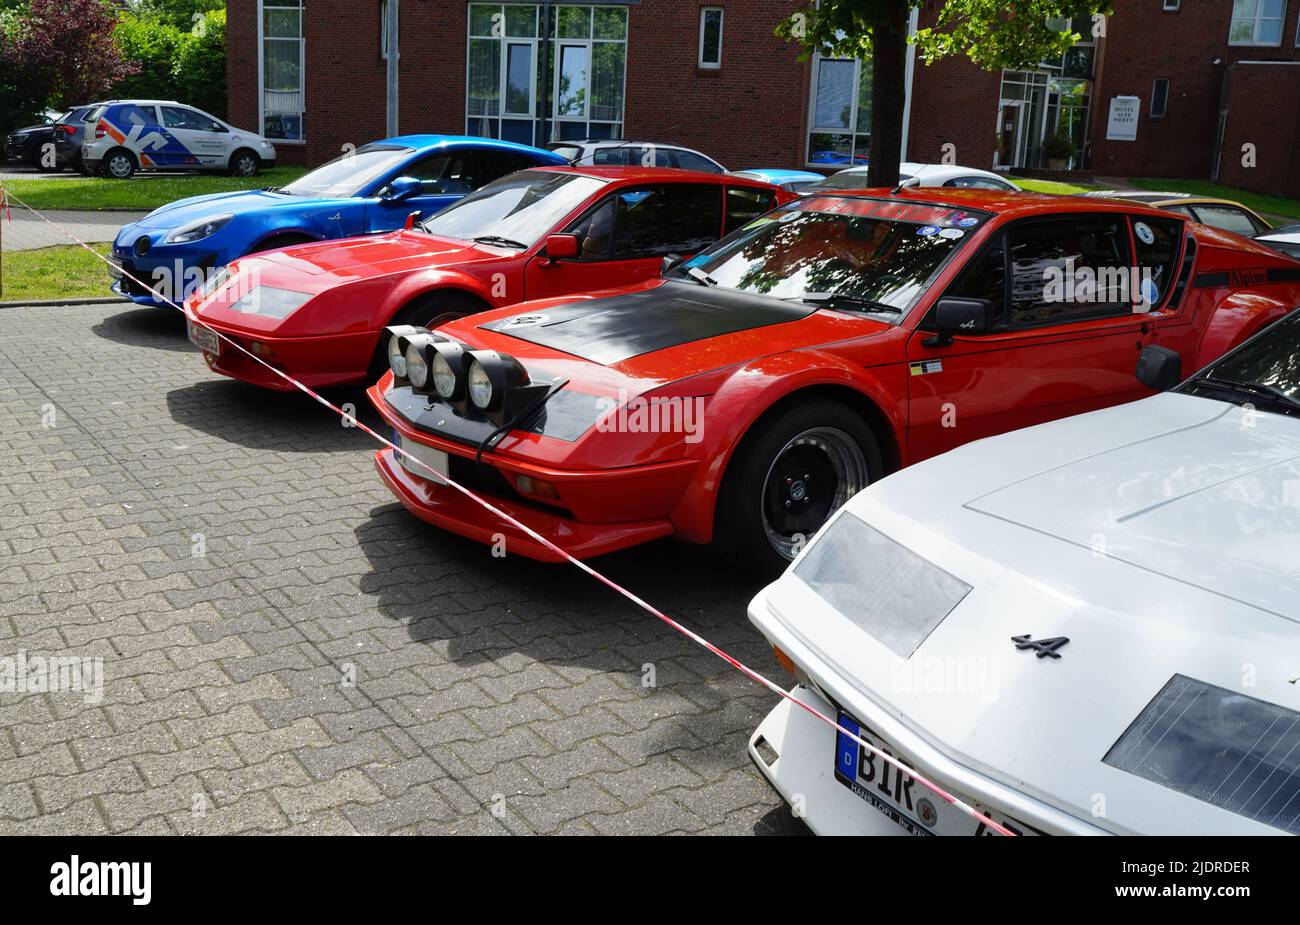 Papenburg, Germany - June 17 2022 Renault Alpine club meeting day. Four Alpines in one row: one blue A110 and three A310 models Stock Photo